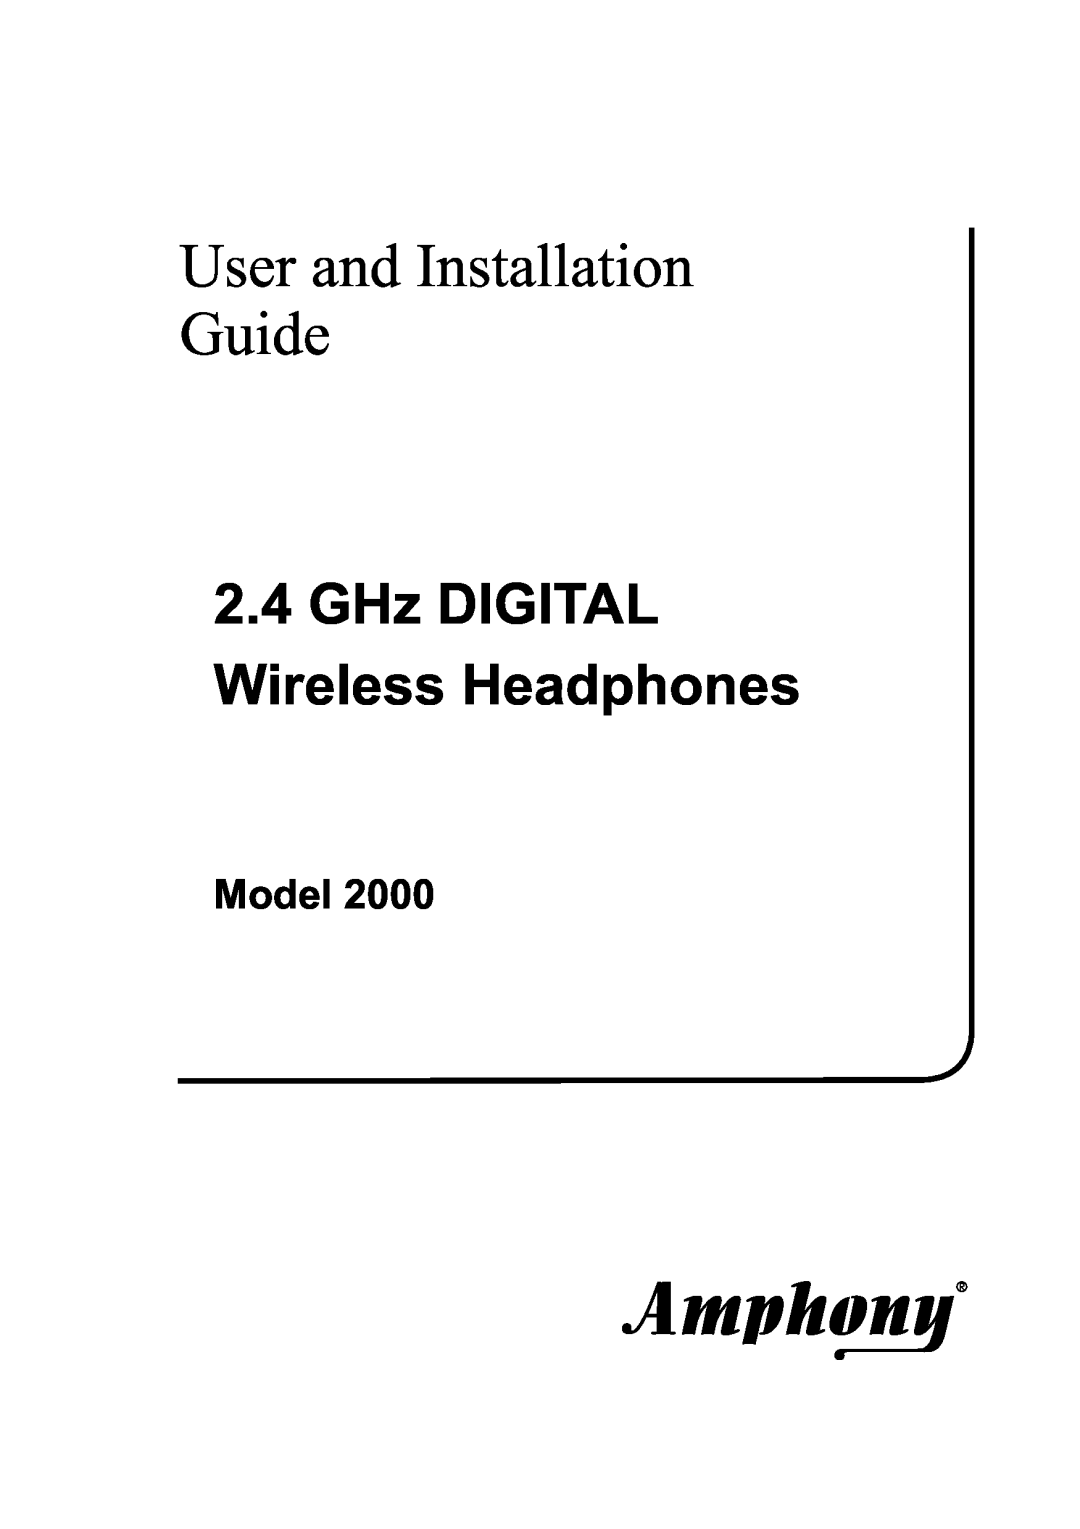 Amphony 2000 manual User and Installation Guide, 2.4GHz DIGITAL Wireless Headphones, Model 